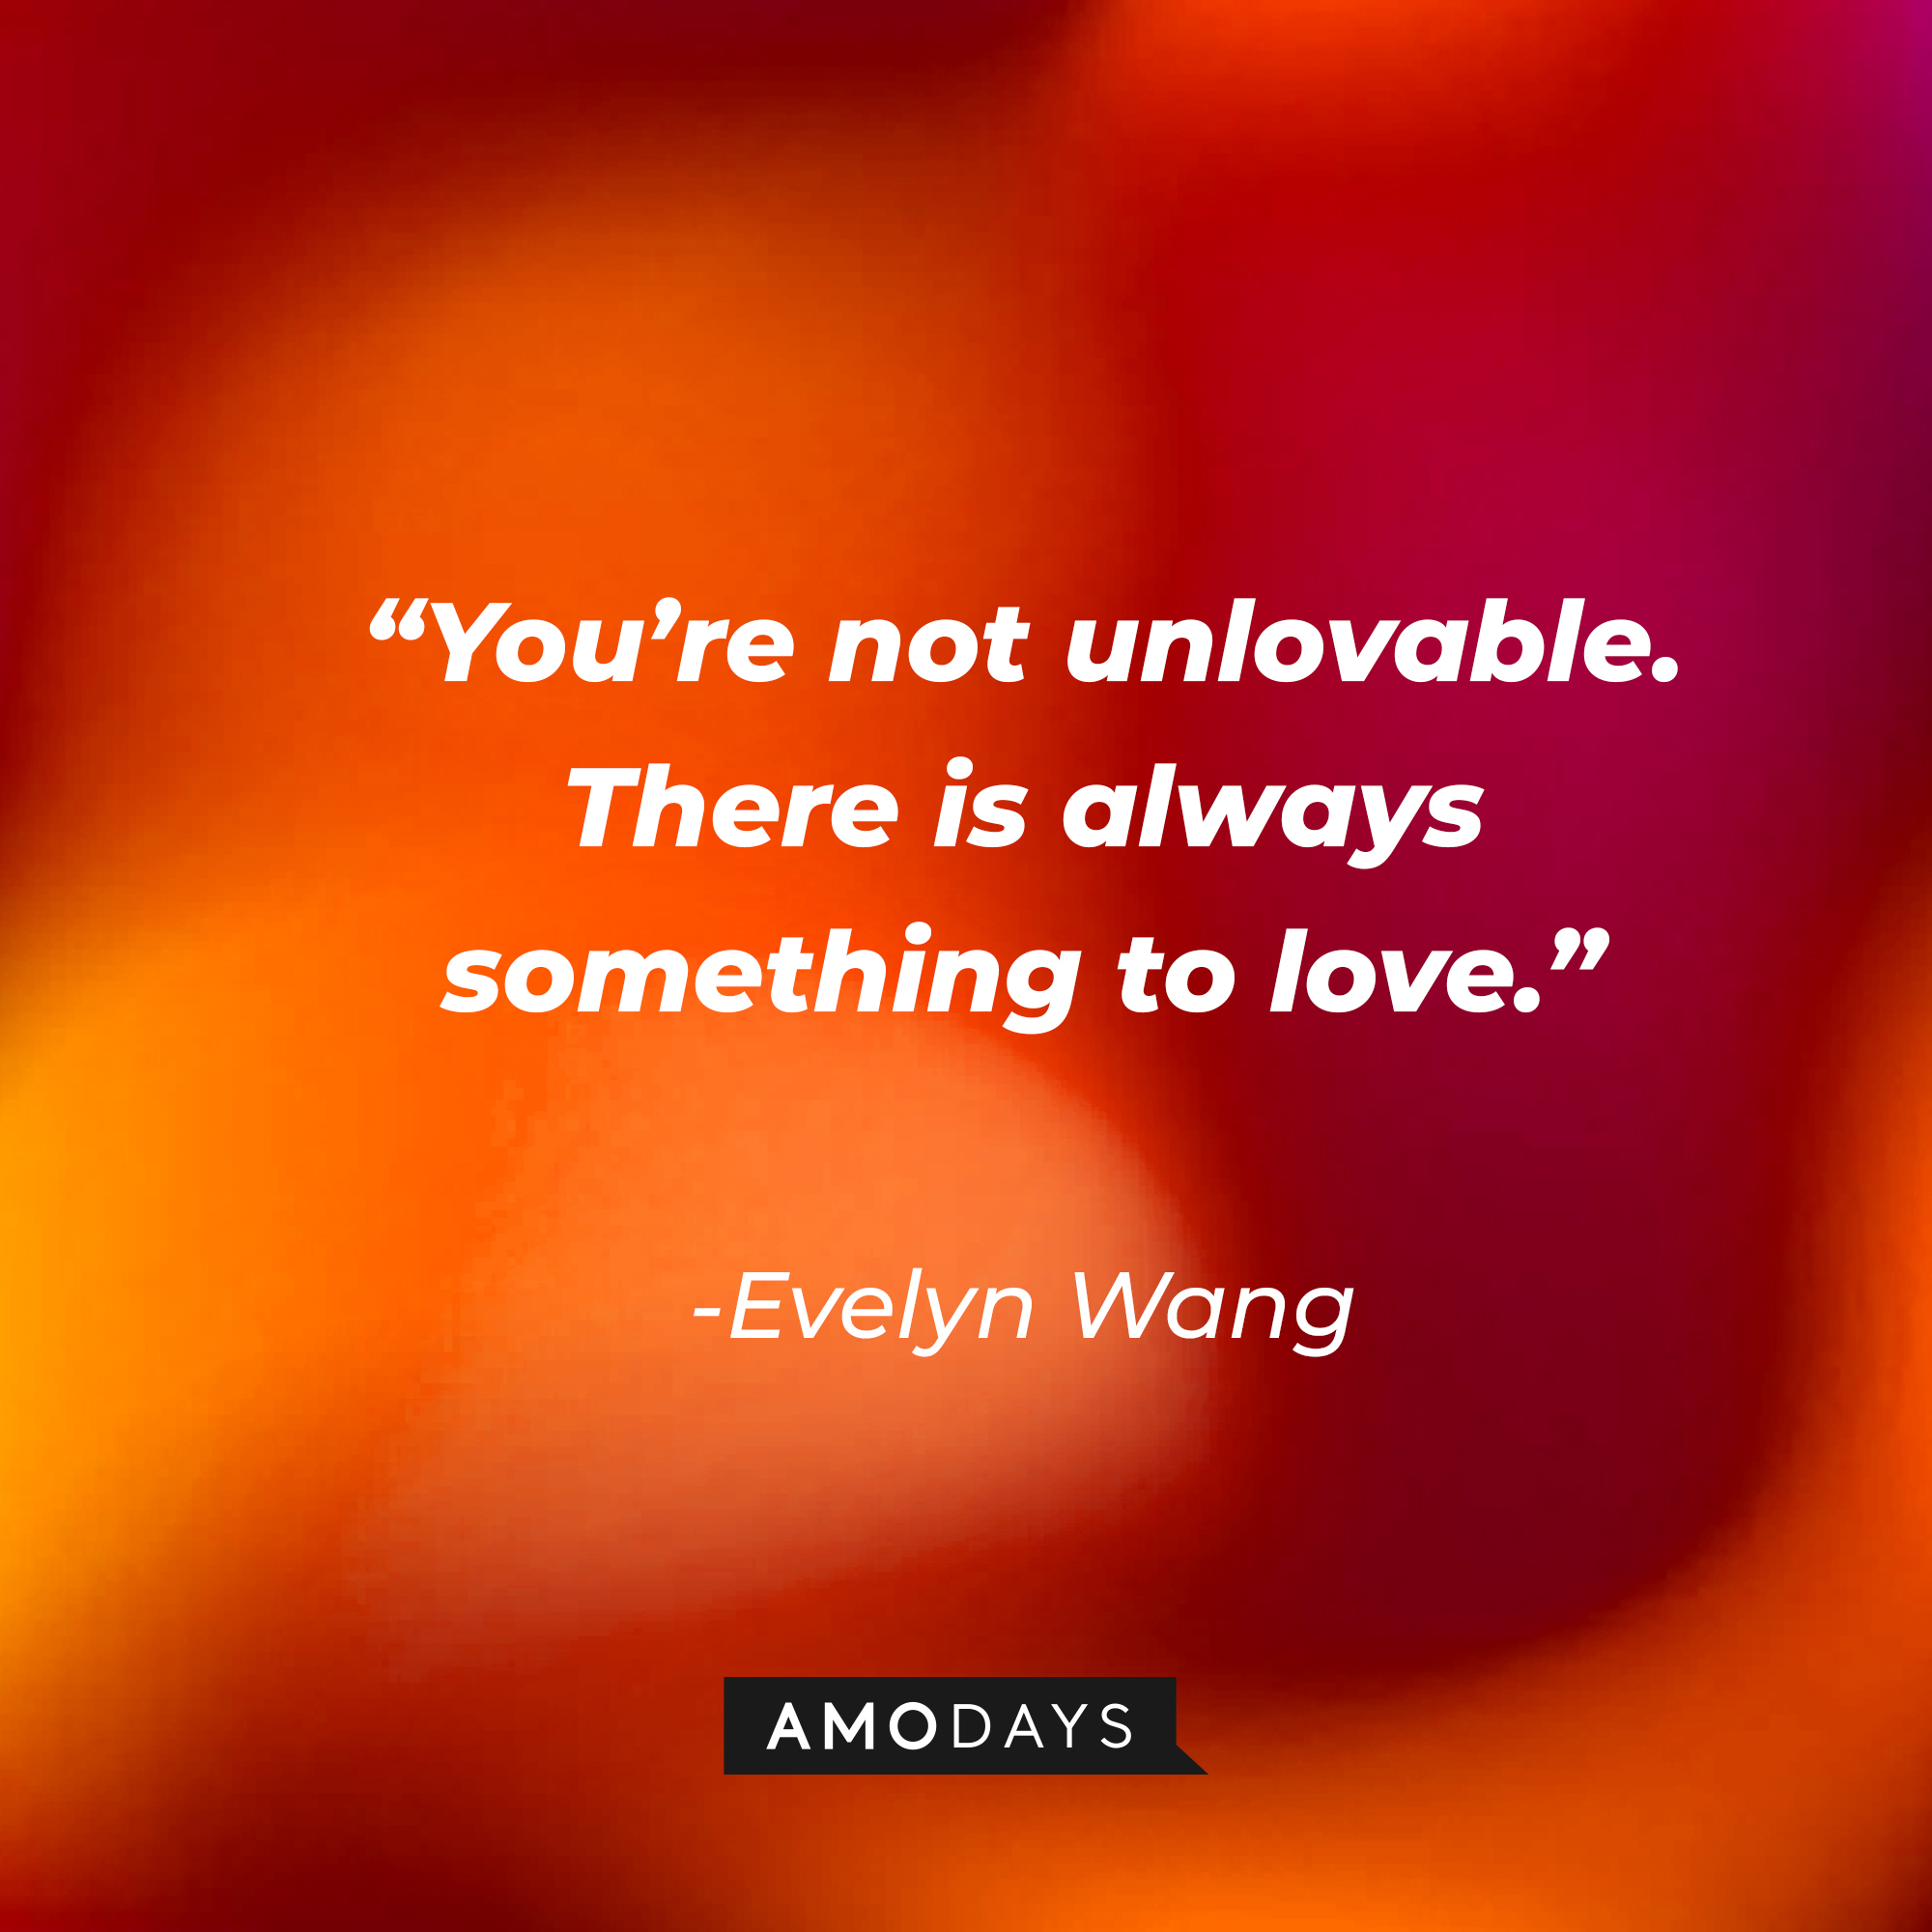 Evelyn Wang’s quote: “You’re not unlovable. There is always something to love.”  | Source: AmoDays